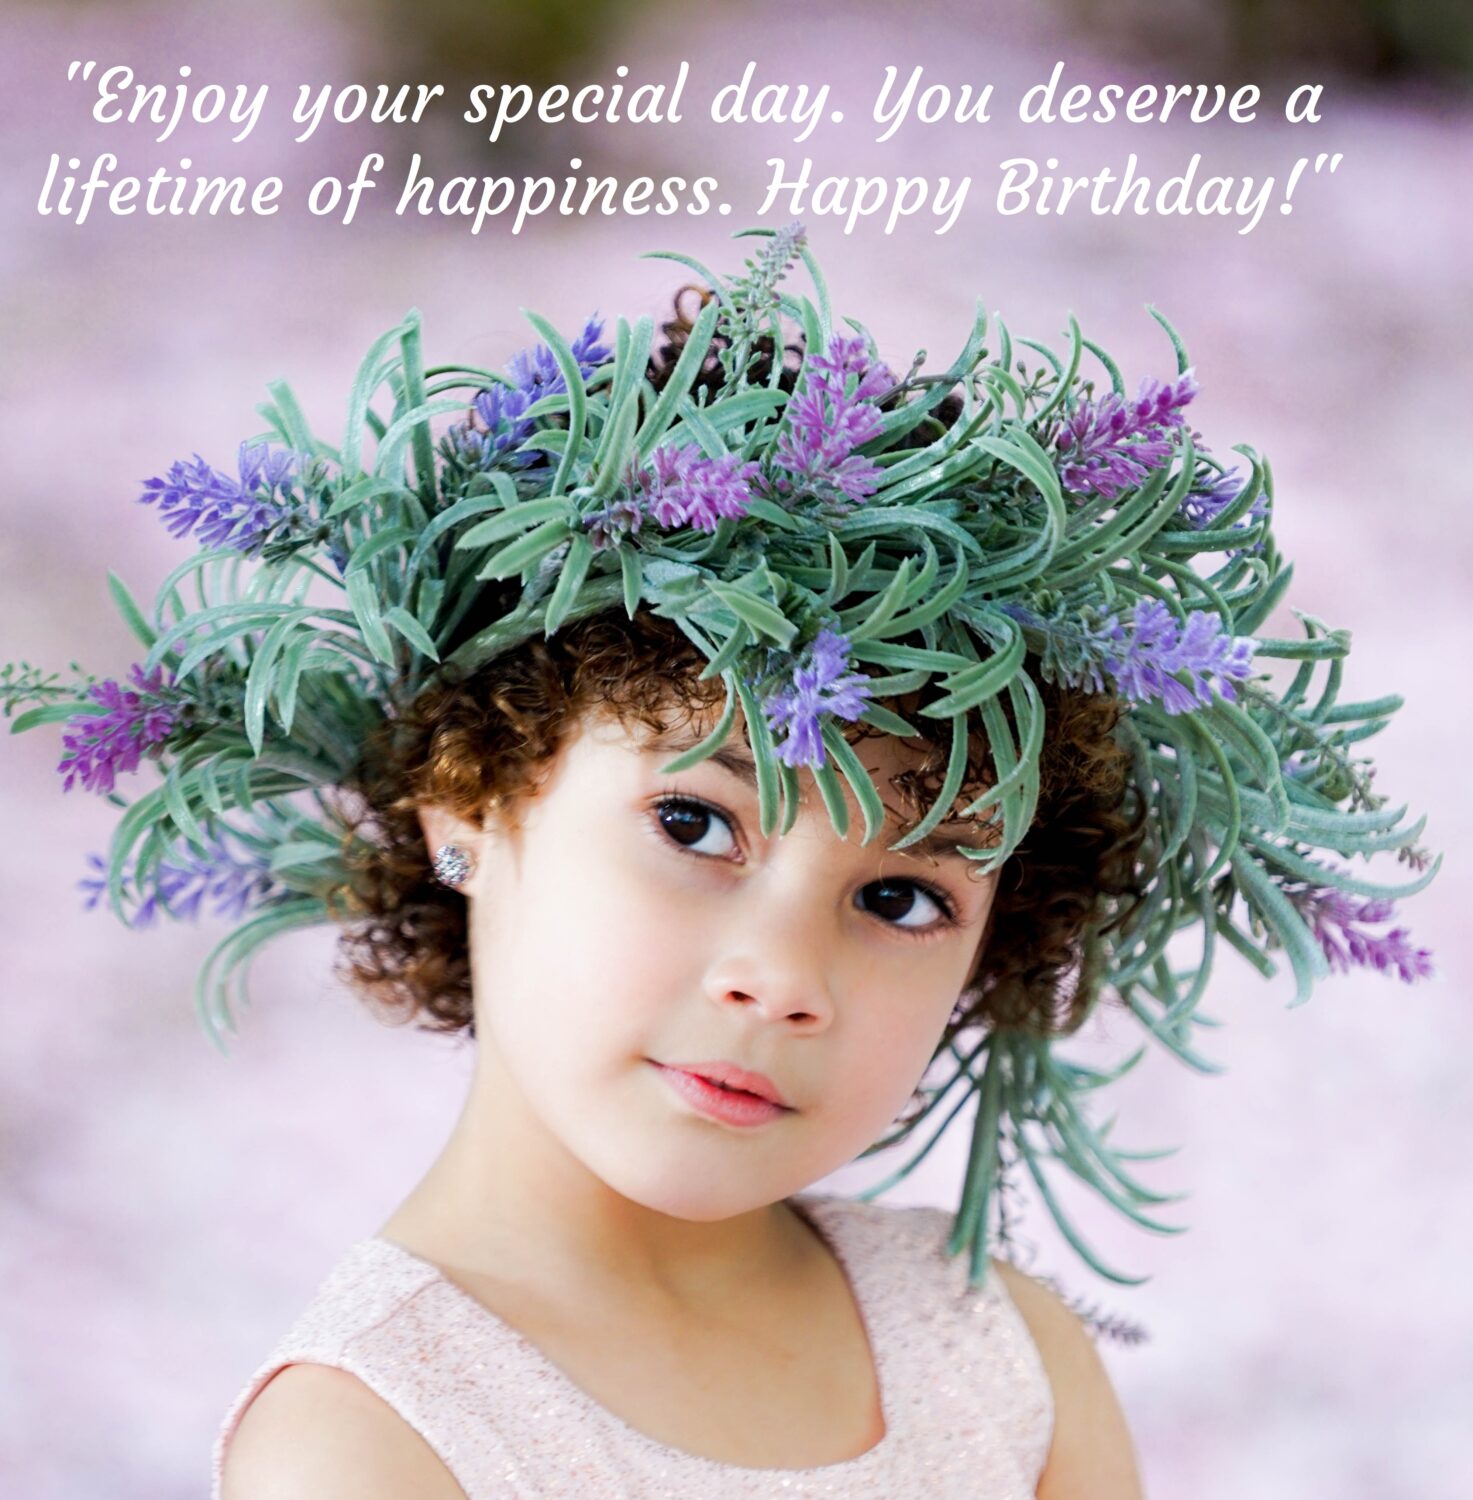 Cute girl with flower crown, Kids birthday wishes